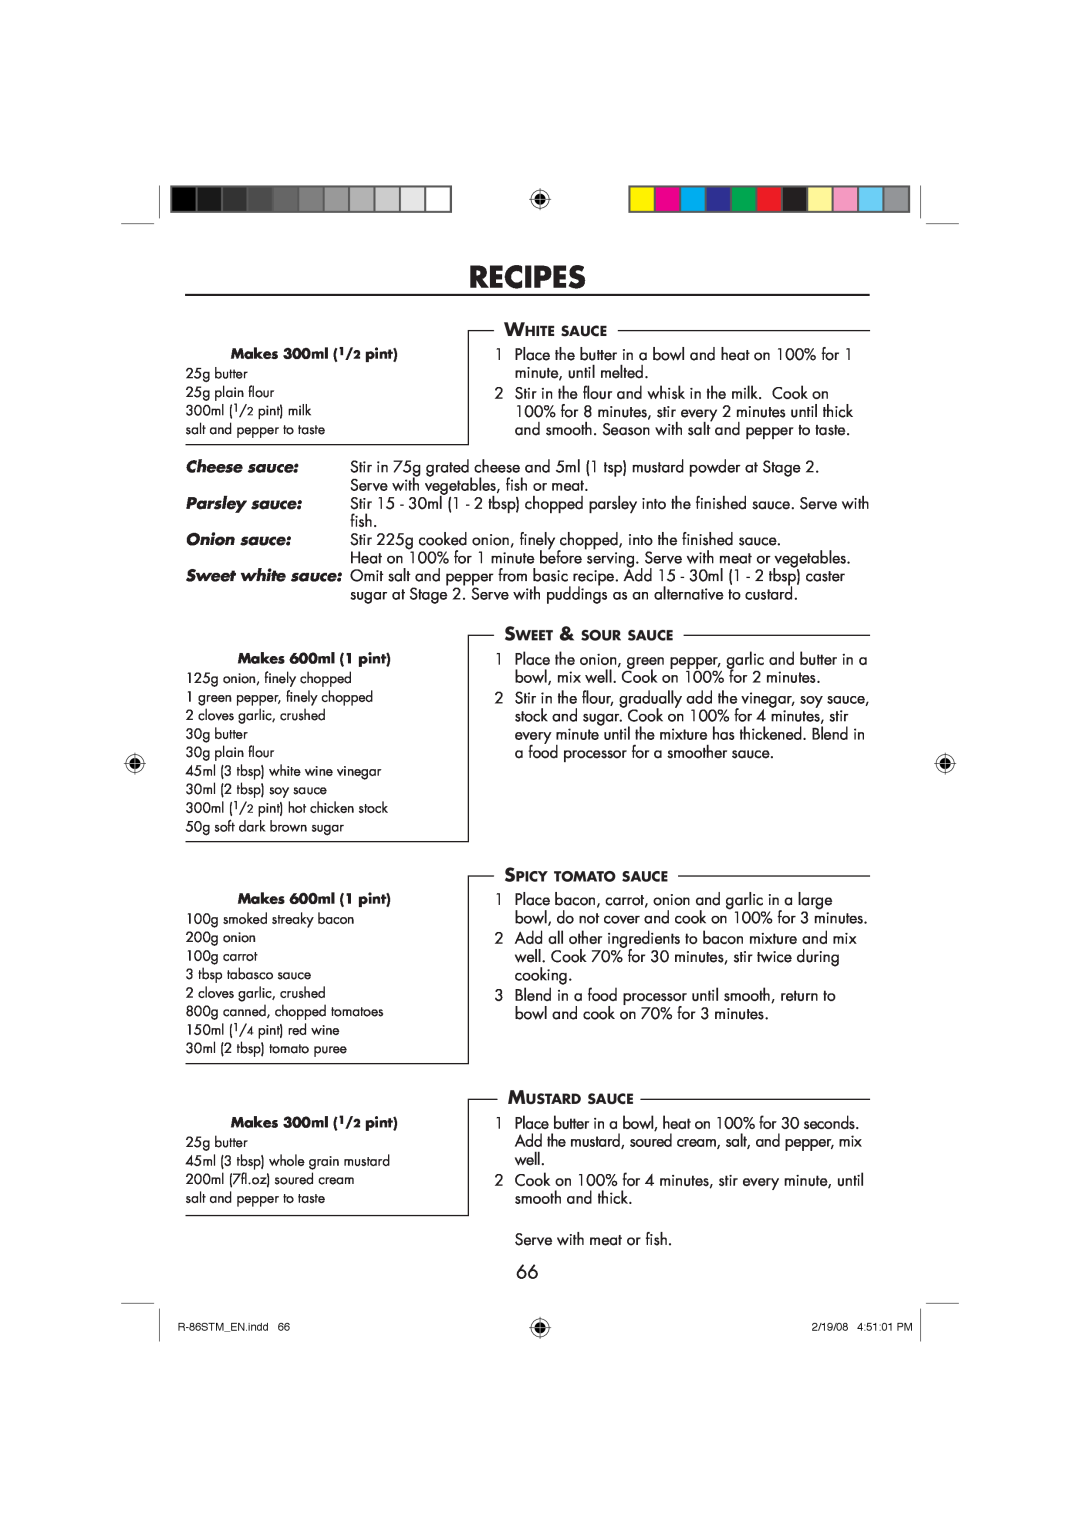 Sharp R-86STM manual Recipes, Serve with meat or fish 